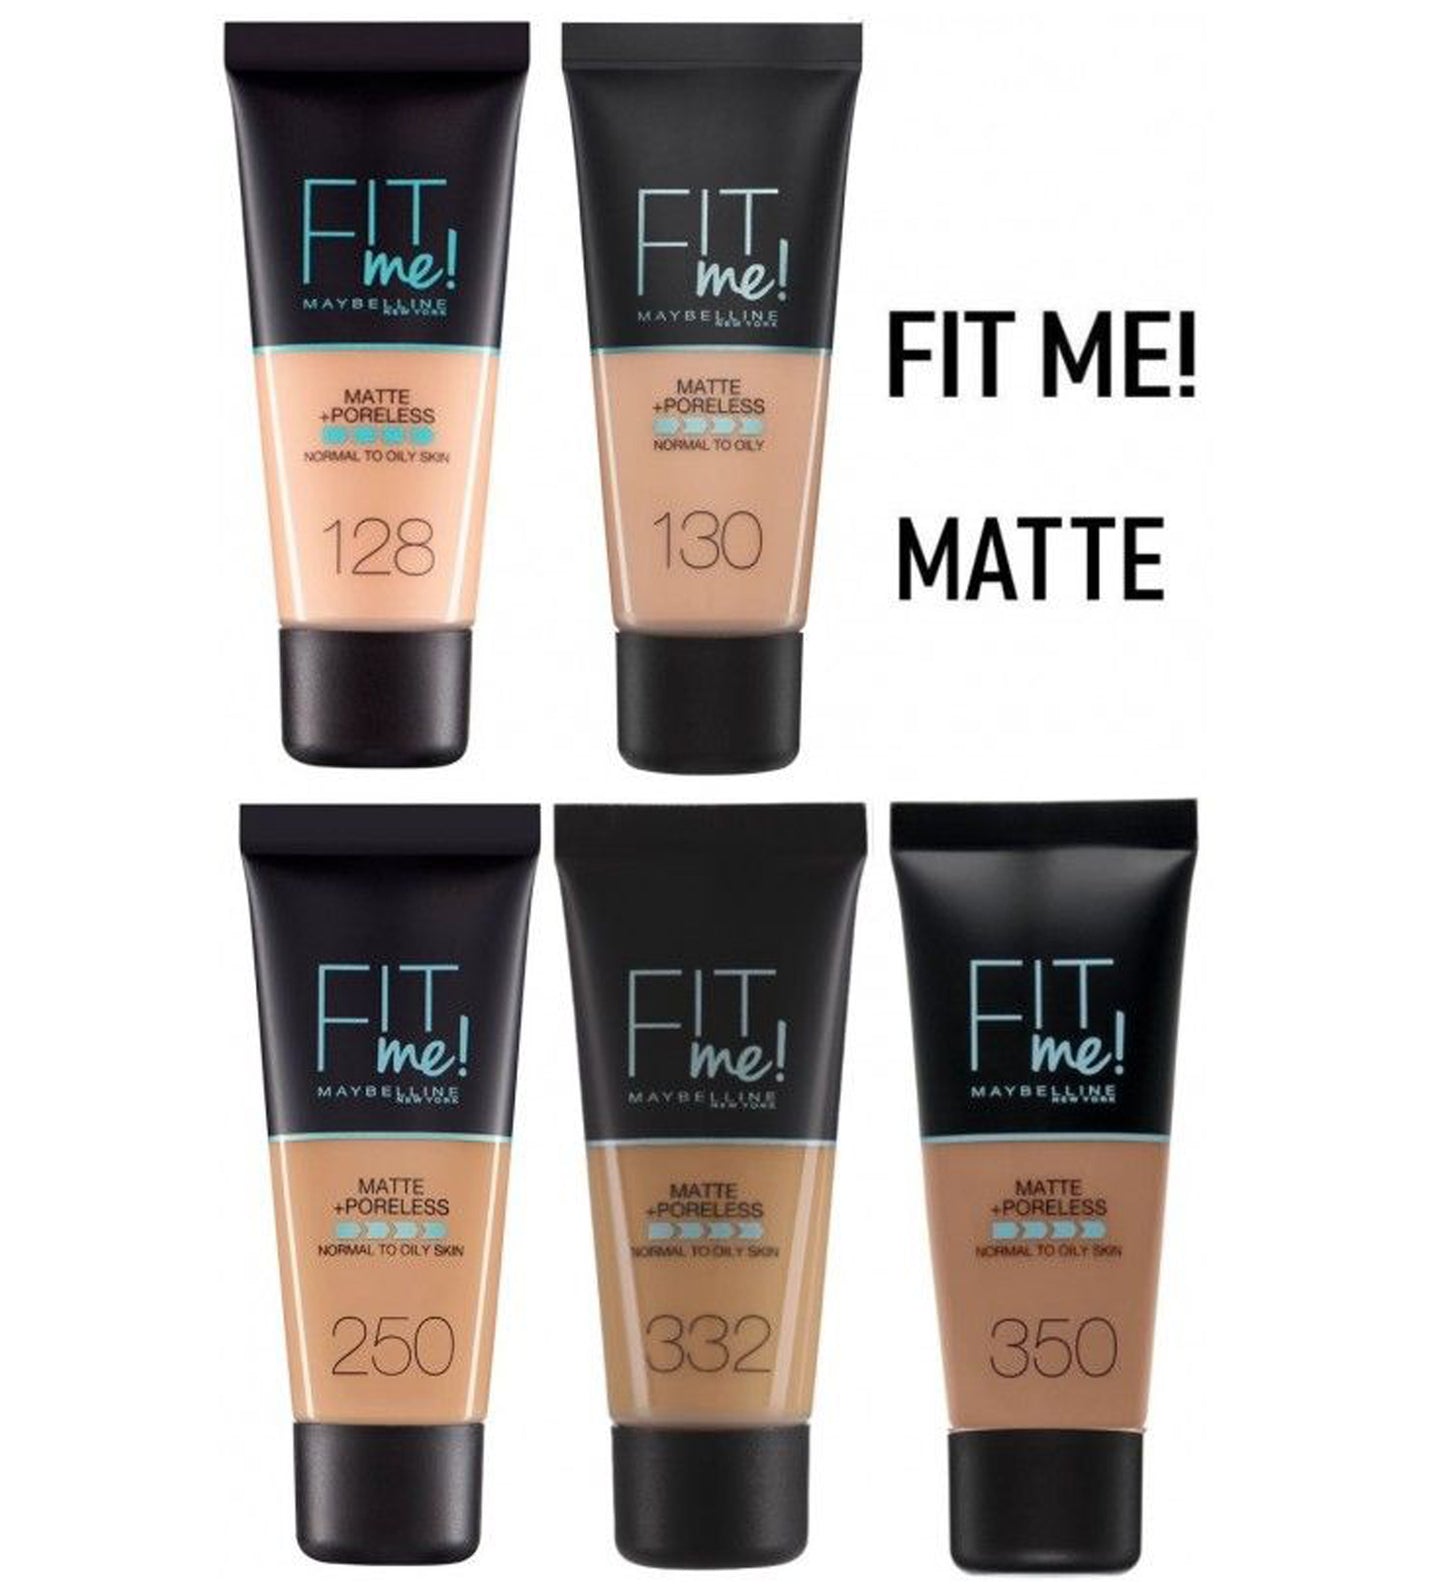 Maquillaje Fit me